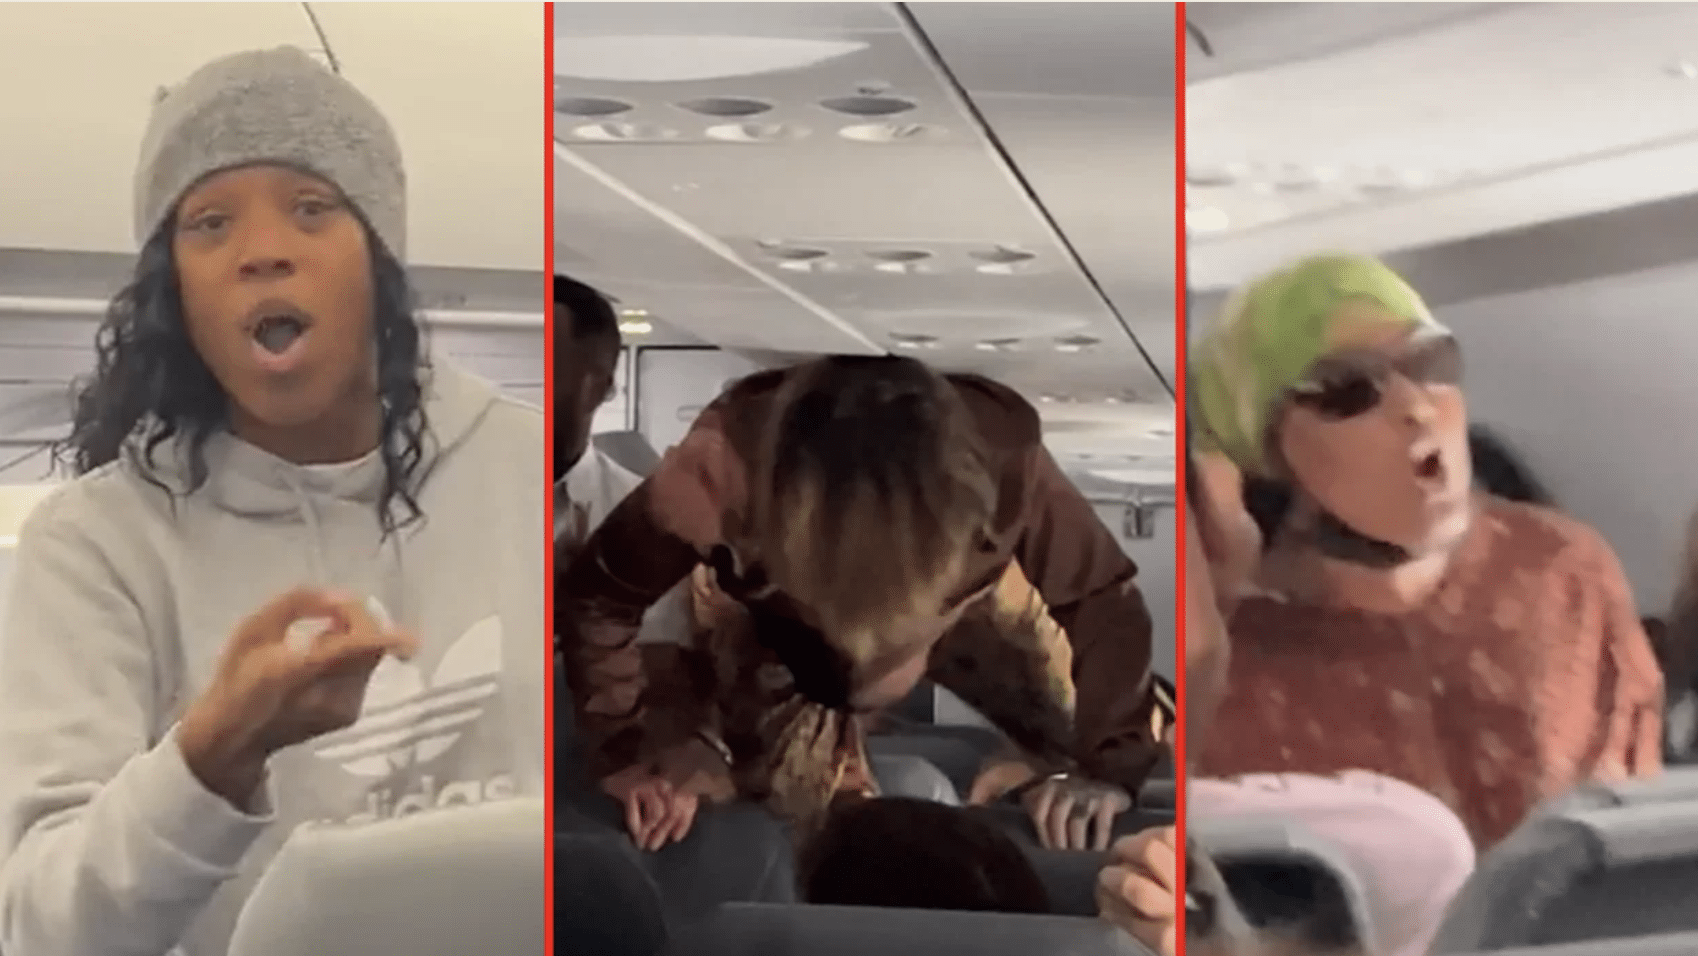 (WATCH) Multiple women interrupt flight with screaming, singing, and crawling over seats, causing claims of demonic possession.